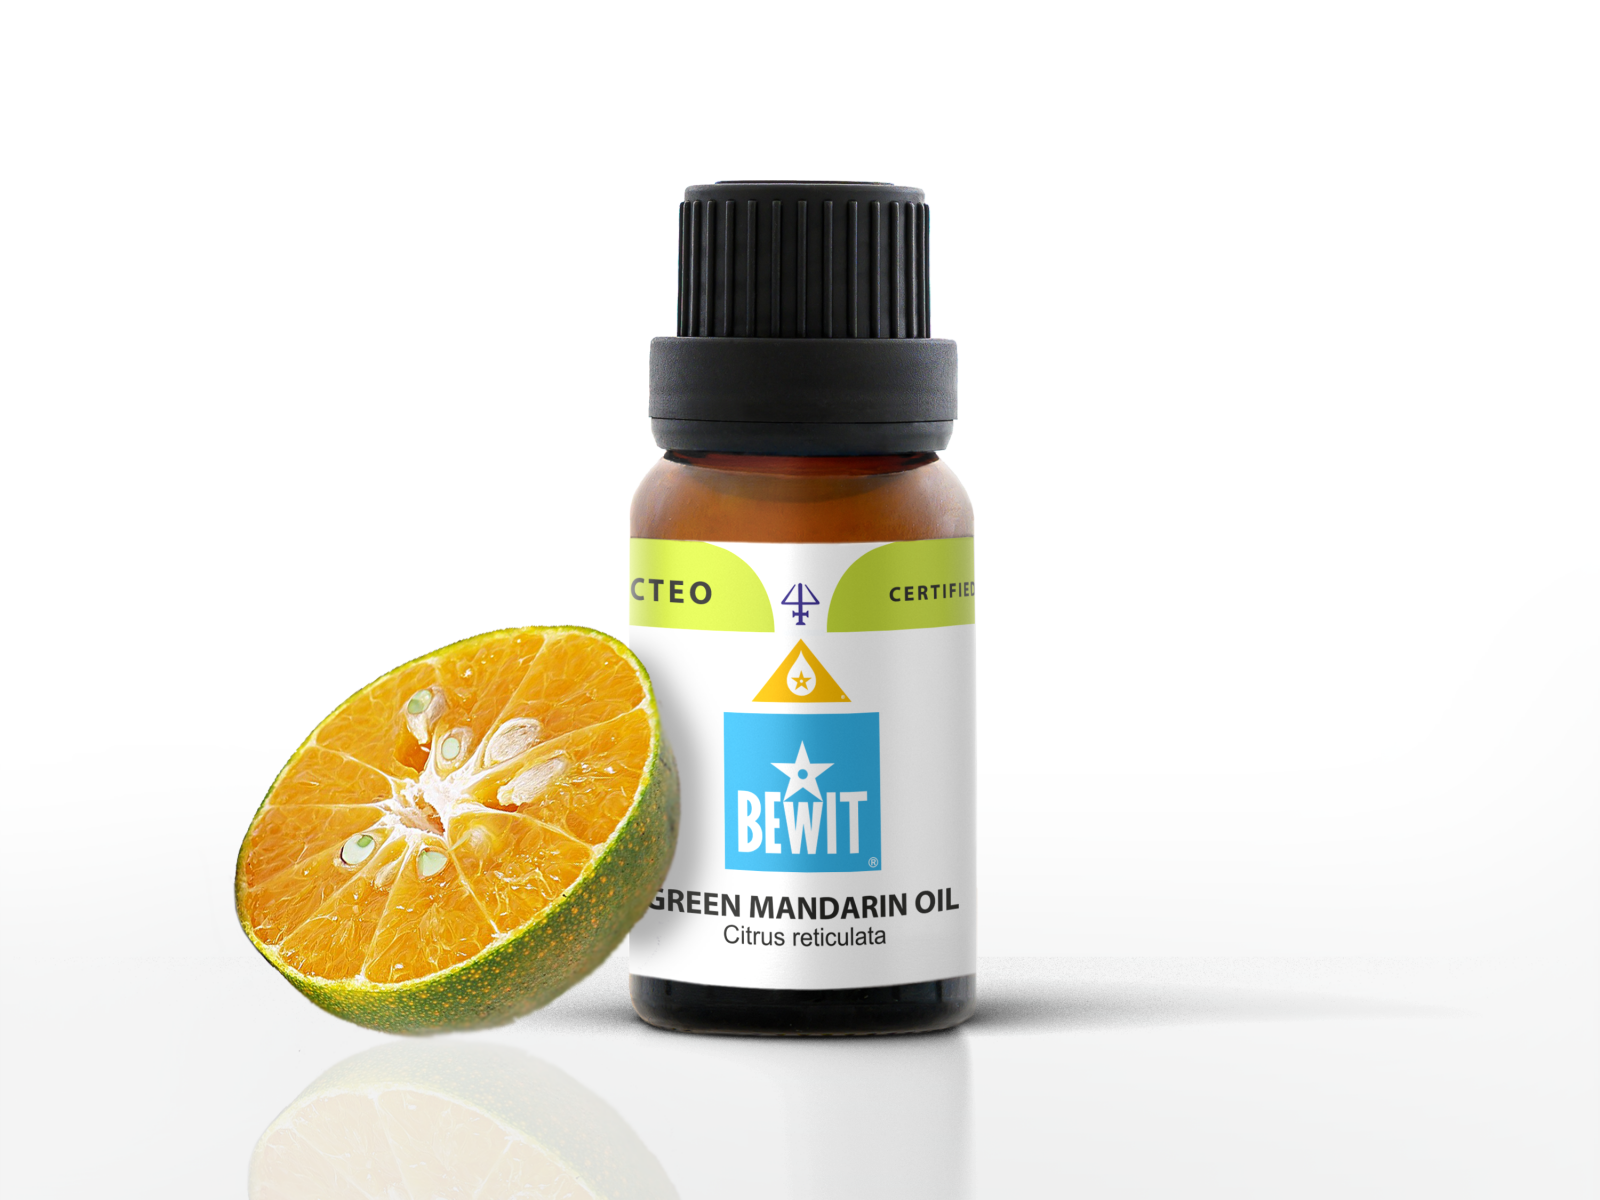 BEWIT Mandarin green - 100% pure and natural CTEO® essential oil - 1